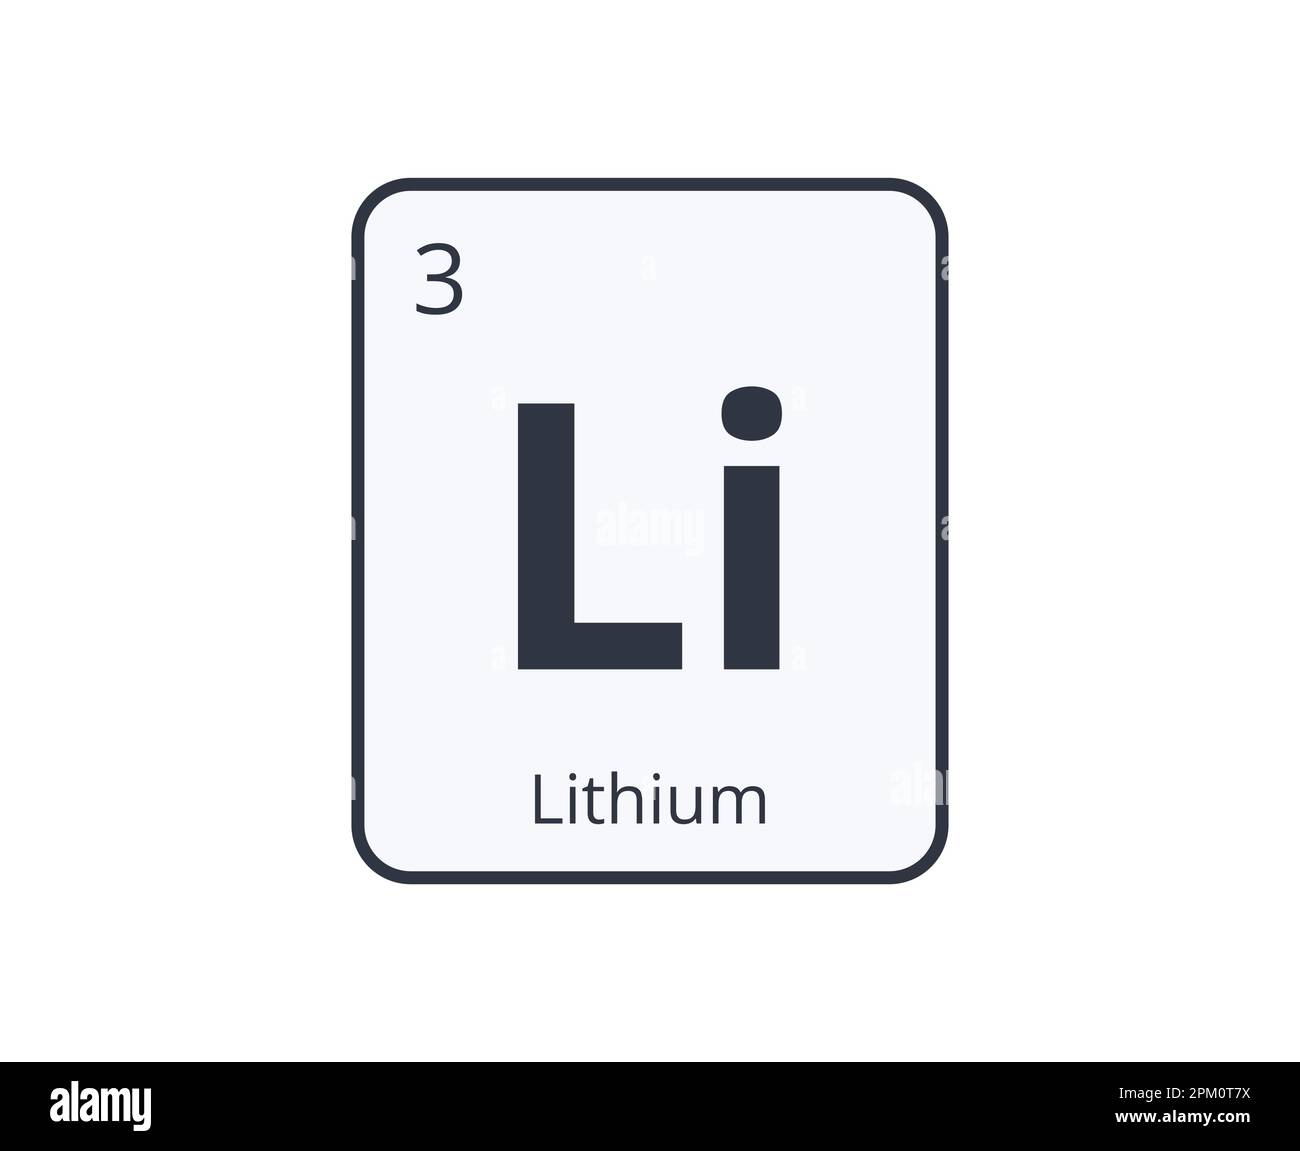 Lithium Chemical Element Graphic for Science Designs. Stock Vector